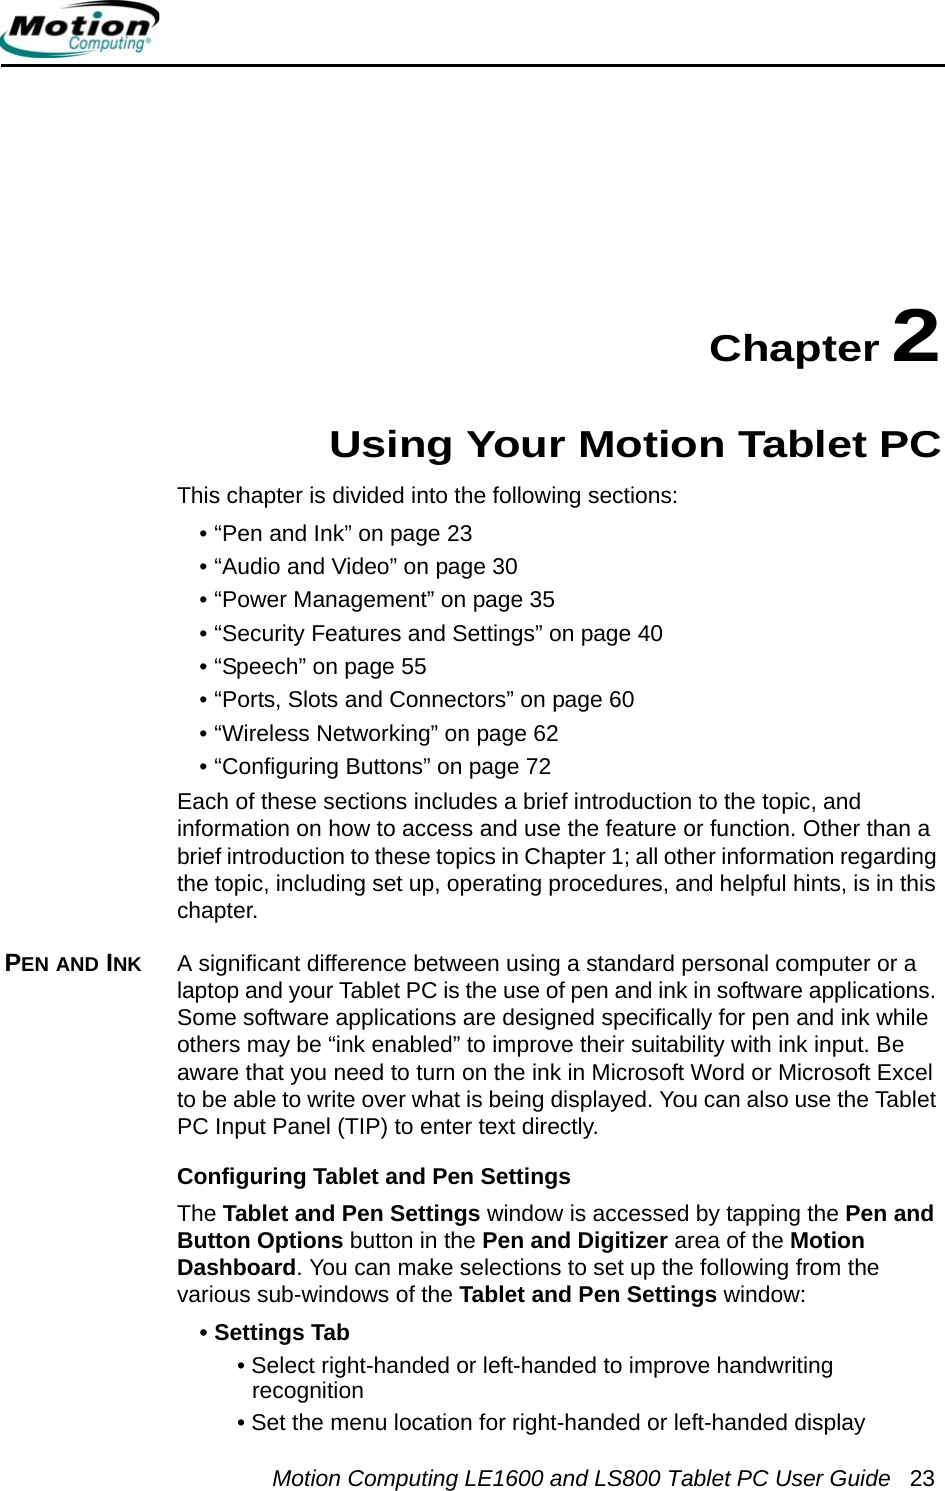 Motion Computing LE1600 and LS800 Tablet PC User Guide 23Chapter 2Using Your Motion Tablet PCThis chapter is divided into the following sections:• “Pen and Ink” on page 23• “Audio and Video” on page 30• “Power Management” on page 35• “Security Features and Settings” on page 40• “Speech” on page 55• “Ports, Slots and Connectors” on page 60• “Wireless Networking” on page 62• “Configuring Buttons” on page 72Each of these sections includes a brief introduction to the topic, and information on how to access and use the feature or function. Other than a brief introduction to these topics in Chapter 1; all other information regarding the topic, including set up, operating procedures, and helpful hints, is in this chapter.PEN AND INK A significant difference between using a standard personal computer or a laptop and your Tablet PC is the use of pen and ink in software applications. Some software applications are designed specifically for pen and ink while others may be “ink enabled” to improve their suitability with ink input. Be aware that you need to turn on the ink in Microsoft Word or Microsoft Excel to be able to write over what is being displayed. You can also use the Tablet PC Input Panel (TIP) to enter text directly. Configuring Tablet and Pen SettingsThe Tablet and Pen Settings window is accessed by tapping the Pen and Button Options button in the Pen and Digitizer area of the Motion Dashboard. You can make selections to set up the following from the various sub-windows of the Tablet and Pen Settings window:• Settings Tab• Select right-handed or left-handed to improve handwriting recognition• Set the menu location for right-handed or left-handed display